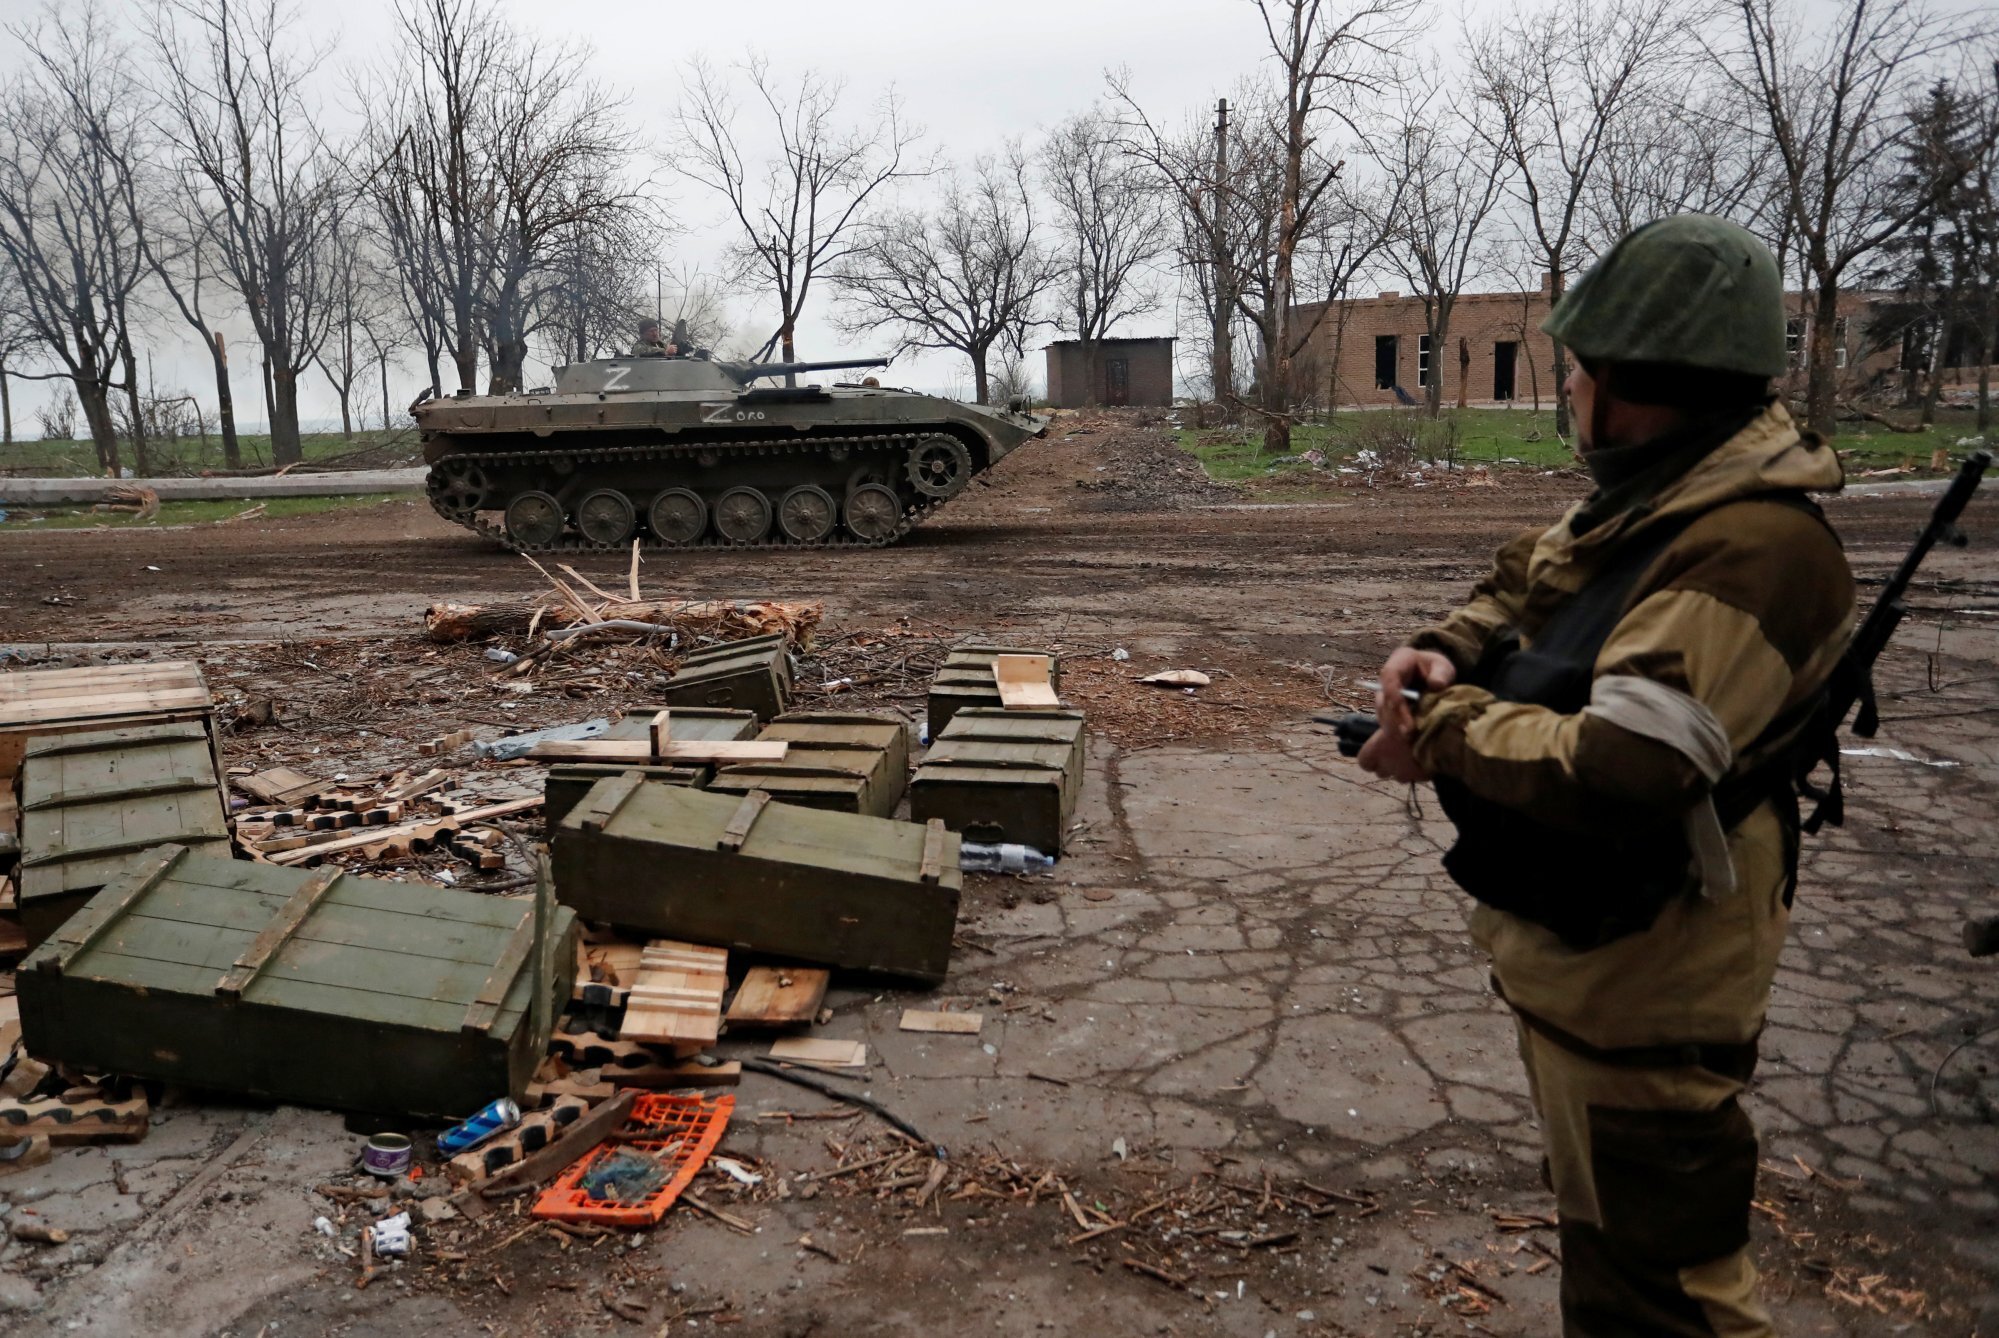 Ukrainian forces in Mariupol have not laid down their weapons after Russia's ultimatum - Photo 2.